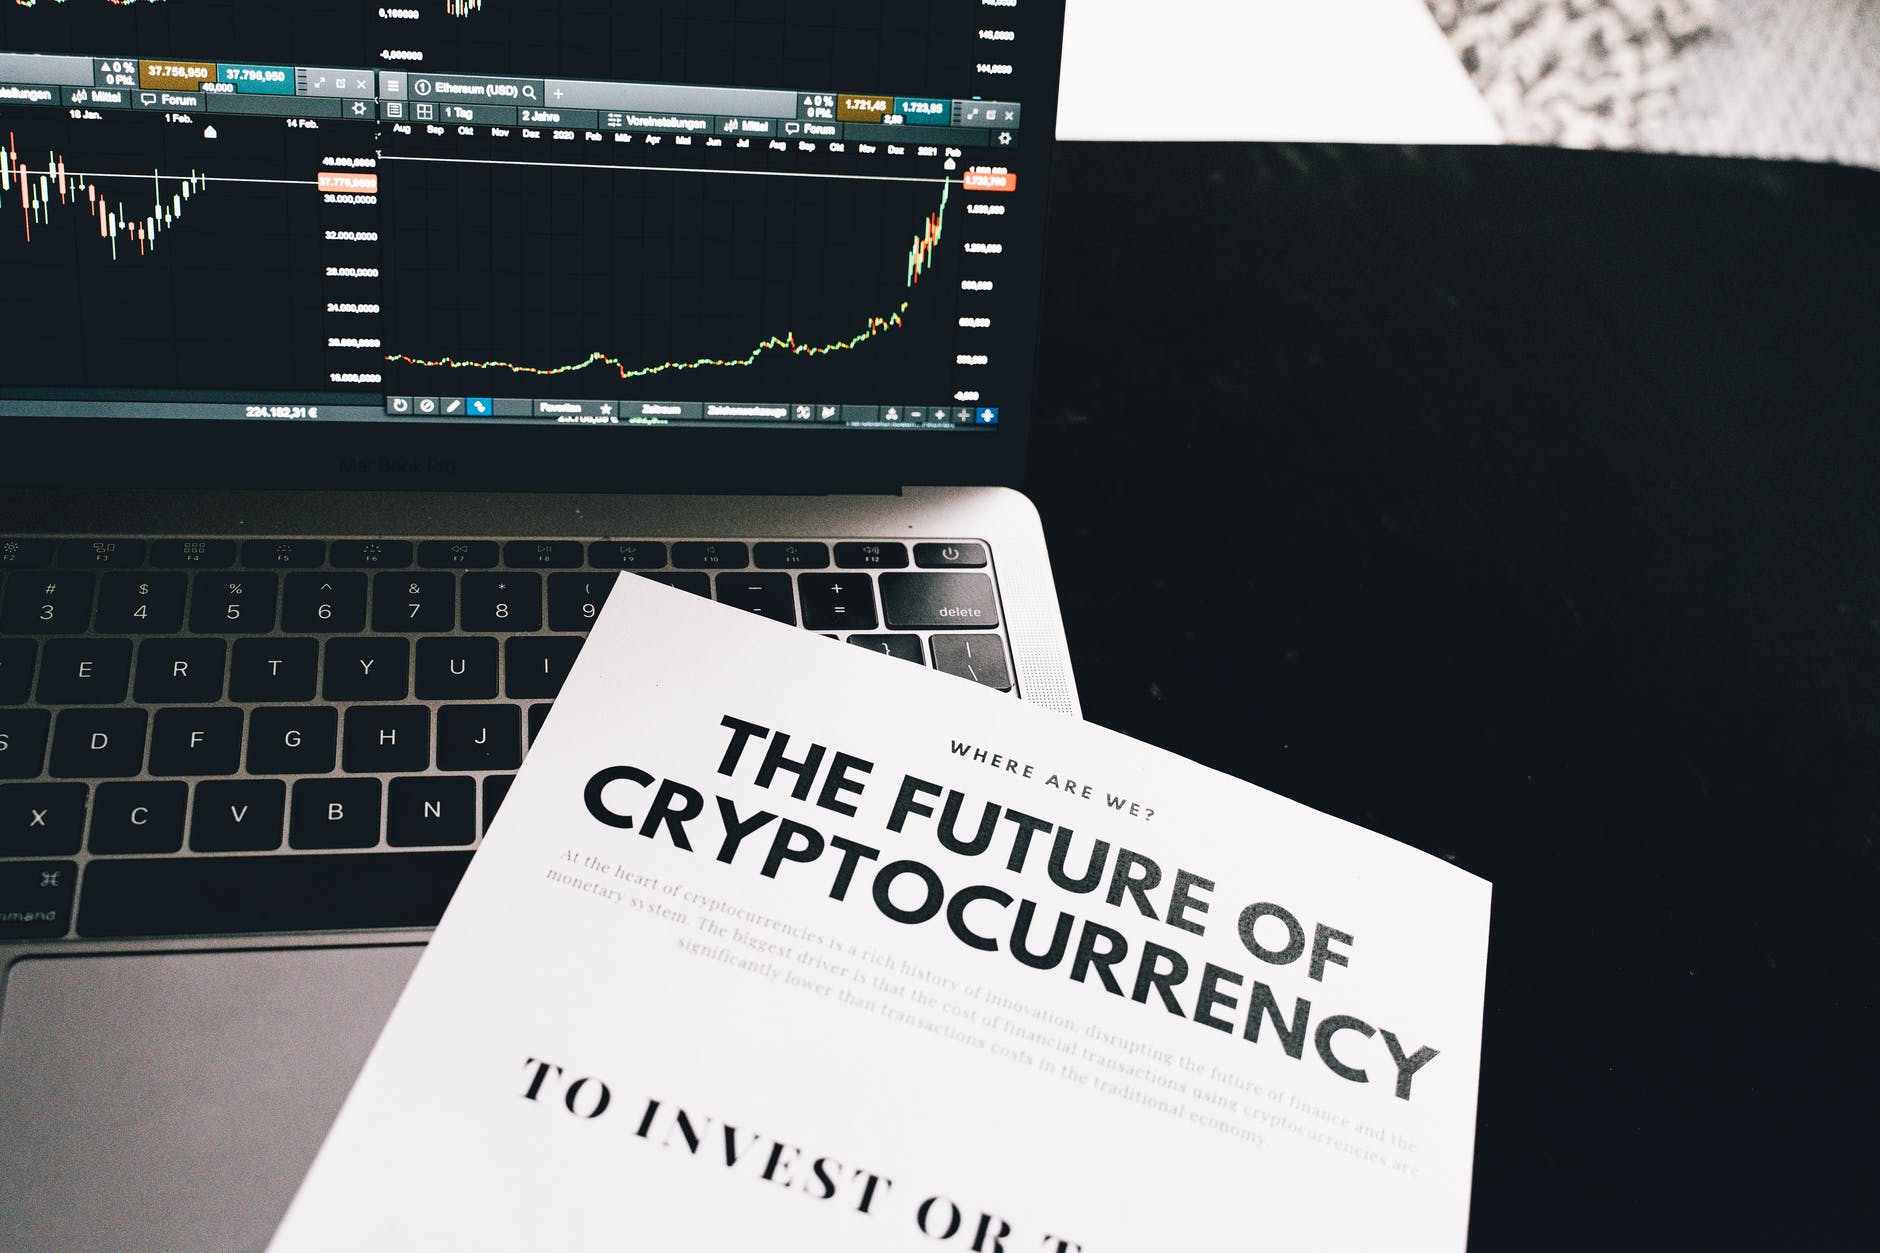 Paper with "The Future of Cryptocurrency" written on it